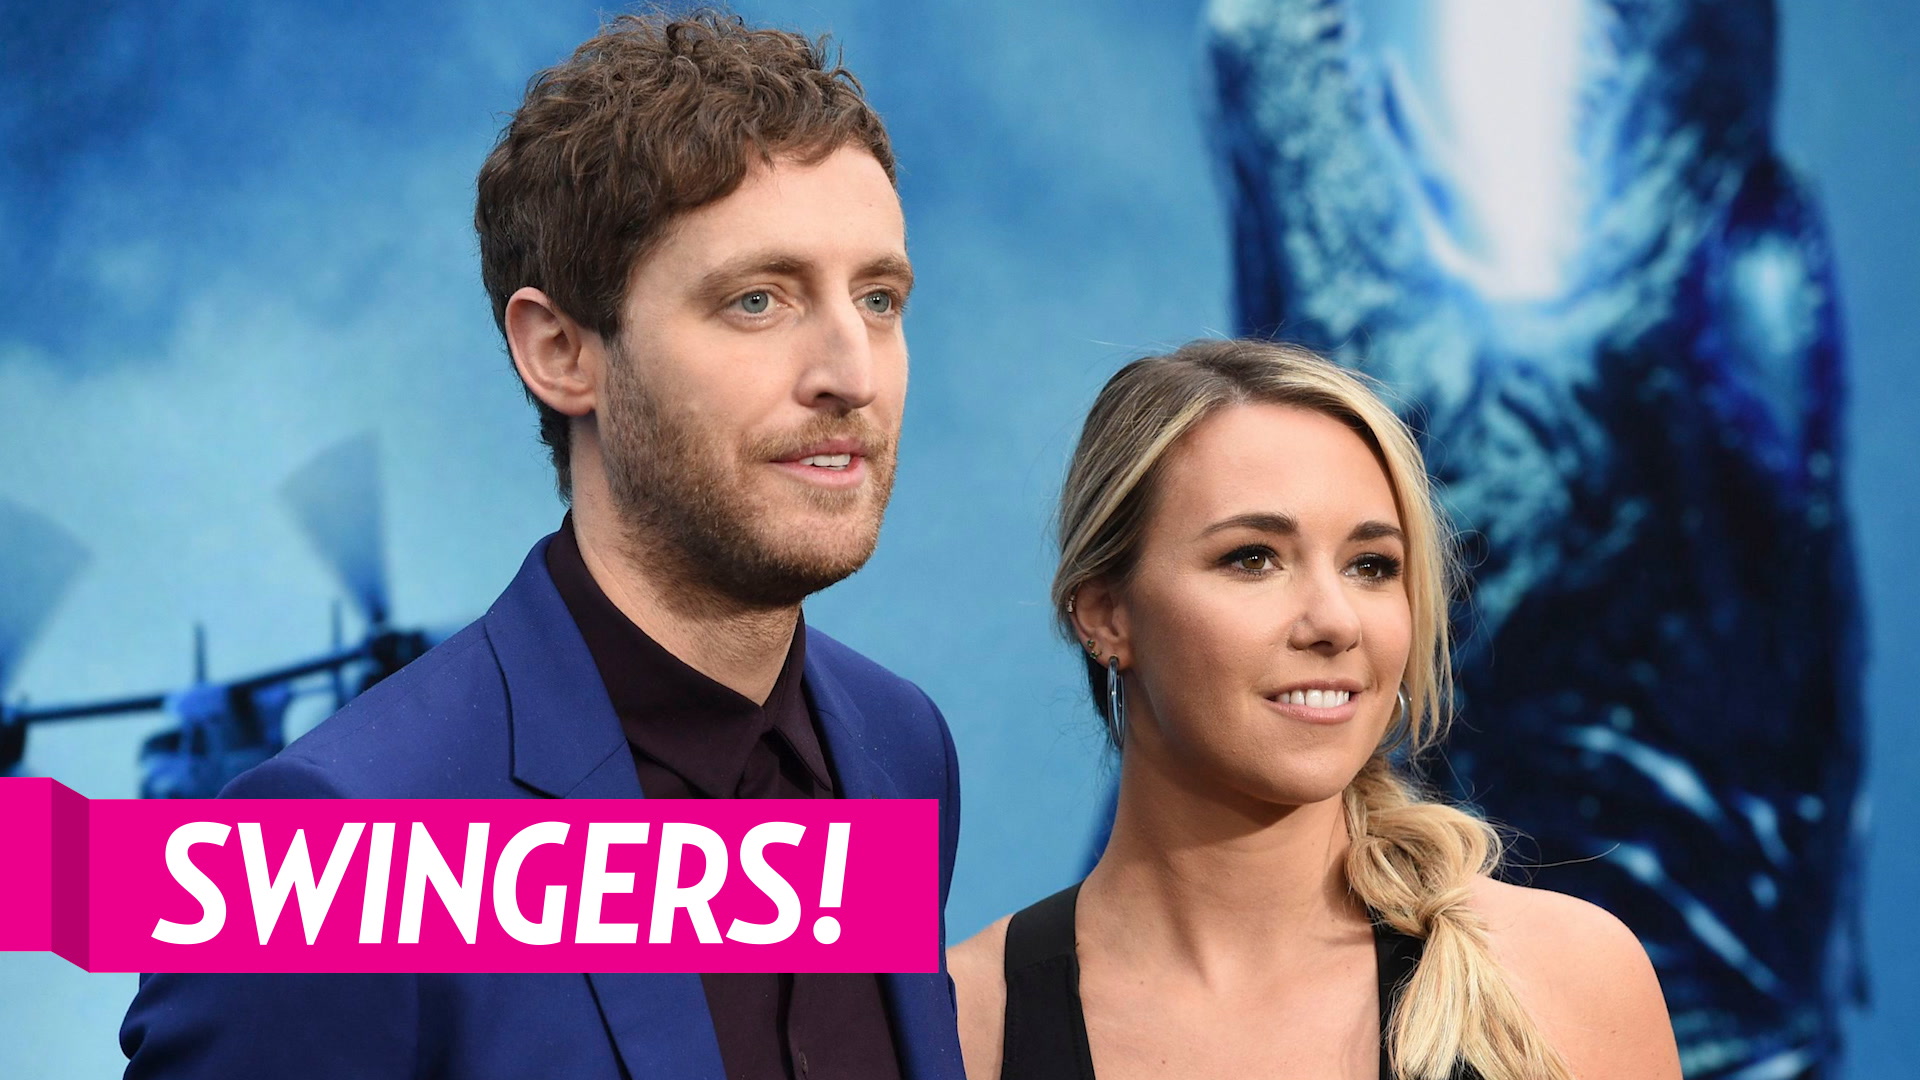 Silicon Valleys Thomas Middleditch Swinging Saved My Marriage